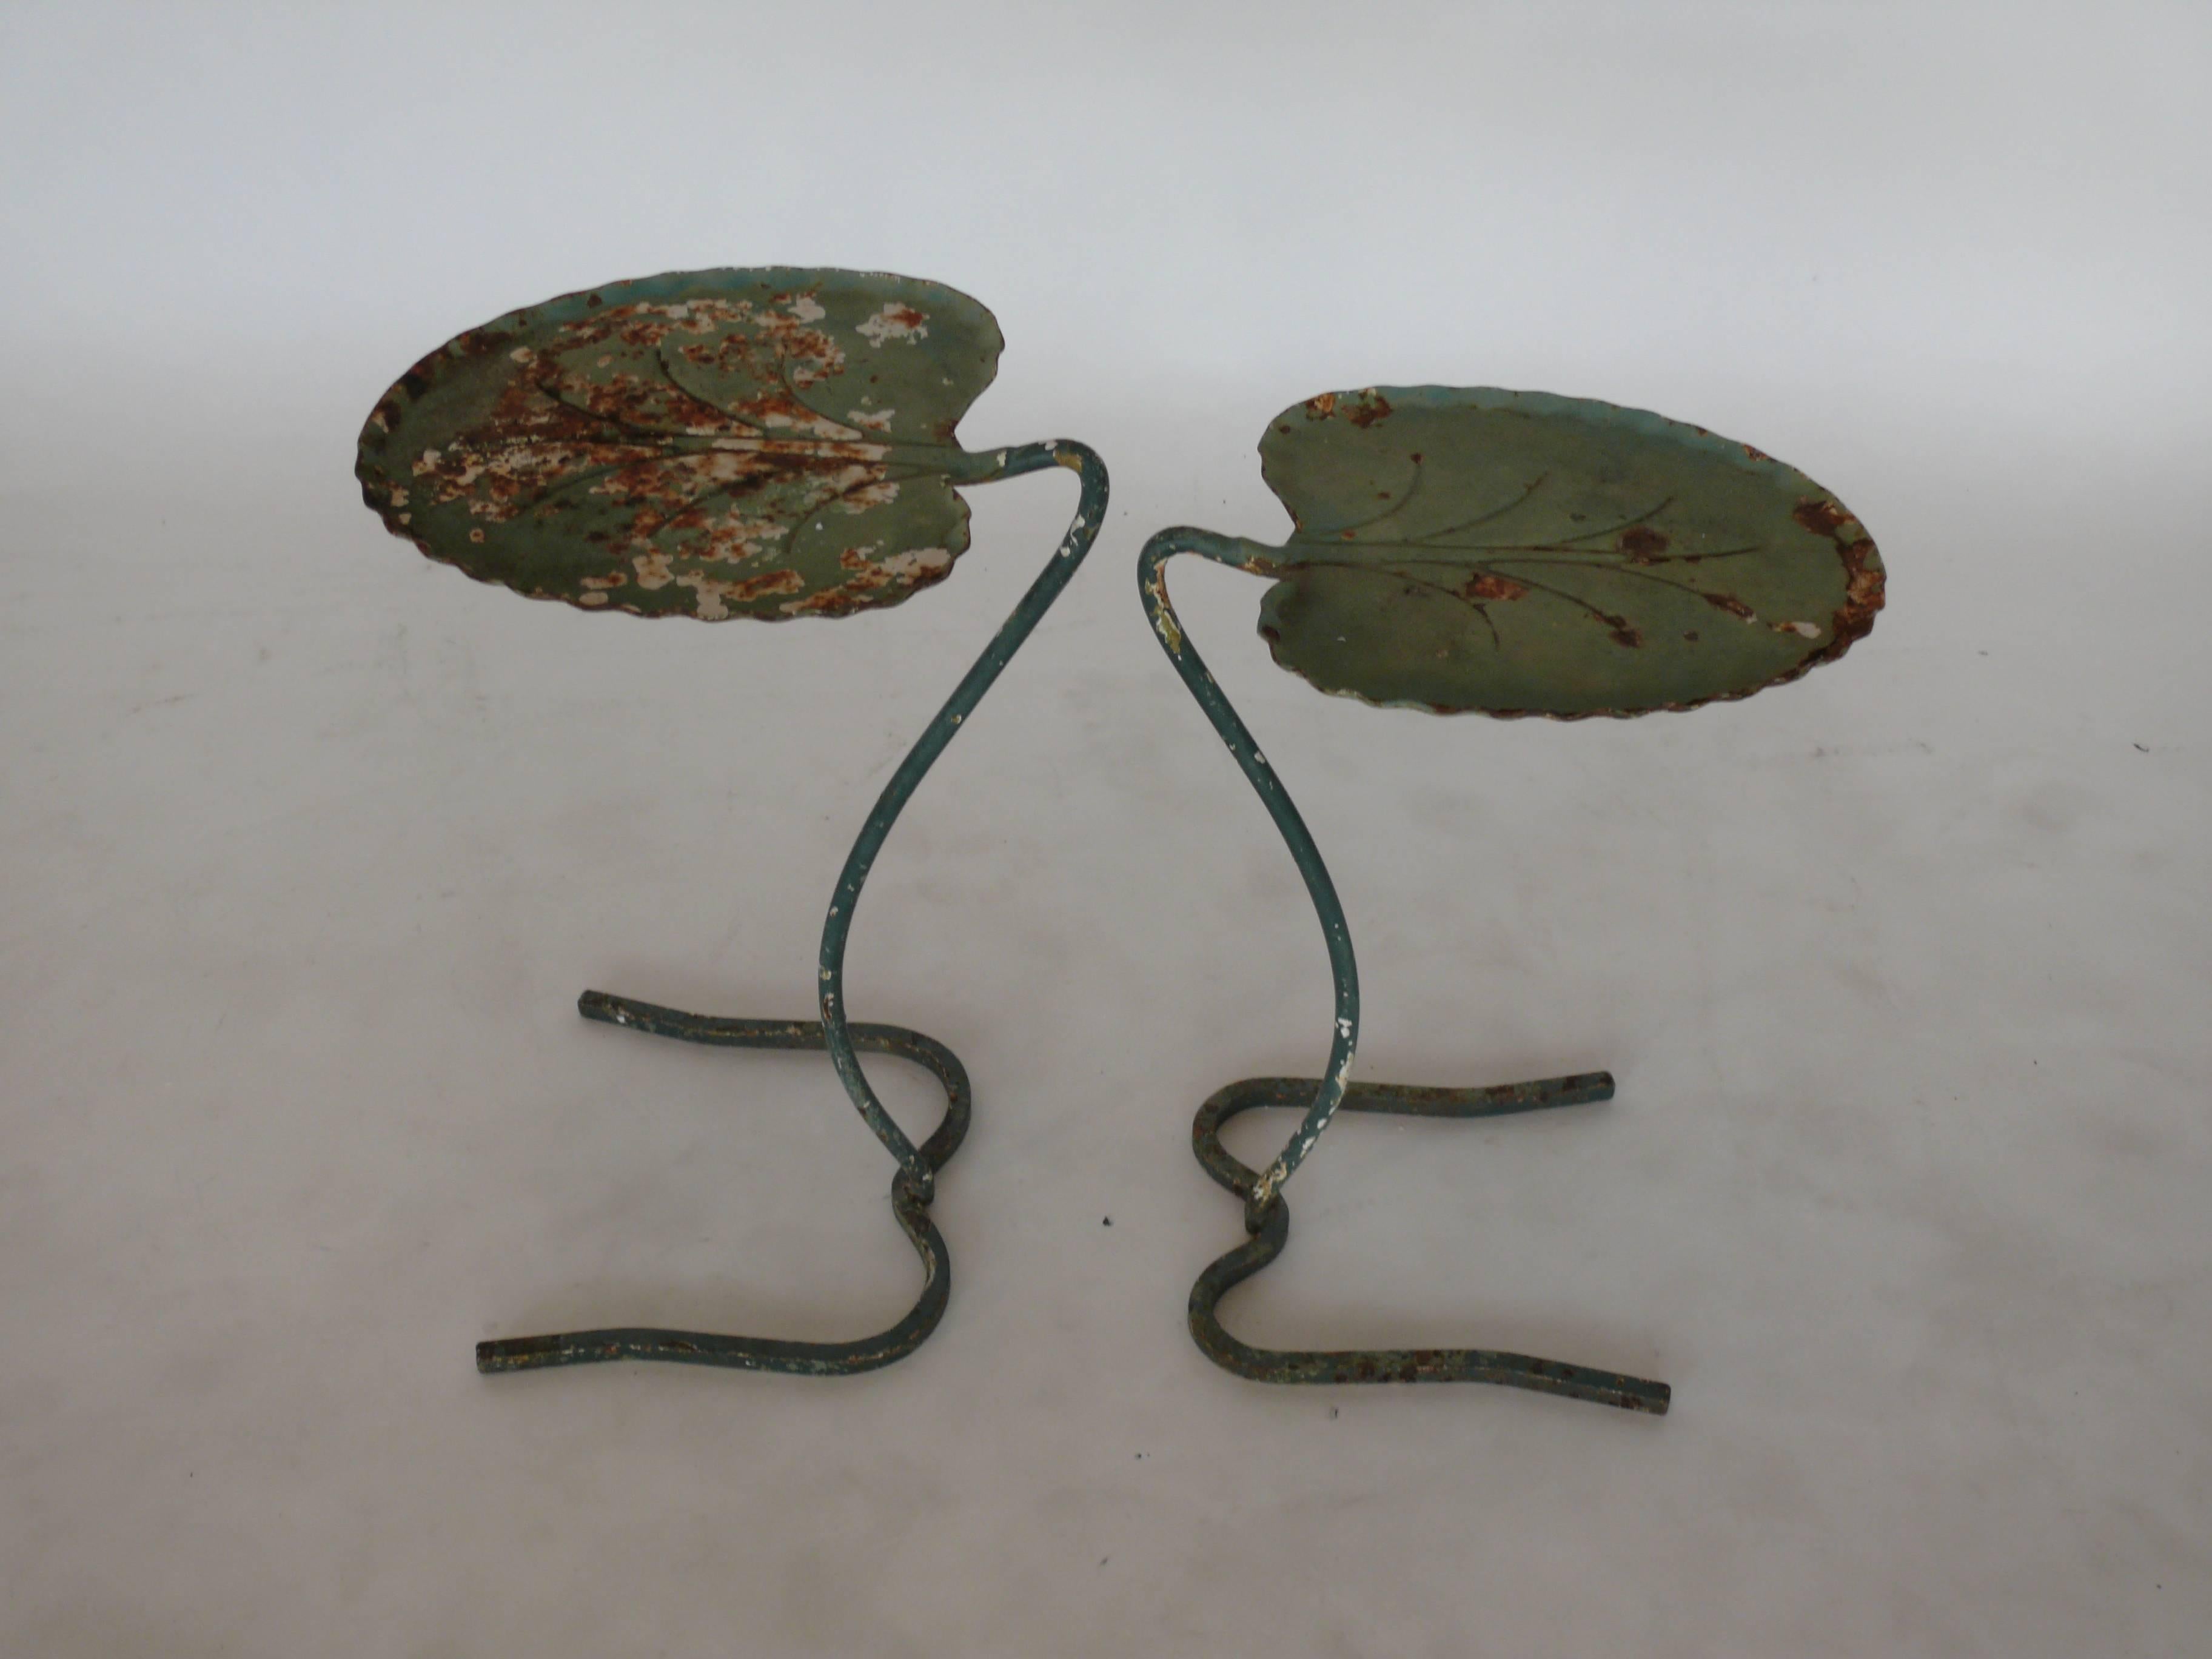 Pair of metal lily pad nesting tables designed by John Salterini. One is larger that the other and they nest together. This set has a great patina and peeling green paint revealing metal. Nice old set suitable for indoor or outdoor use.
Dimensions